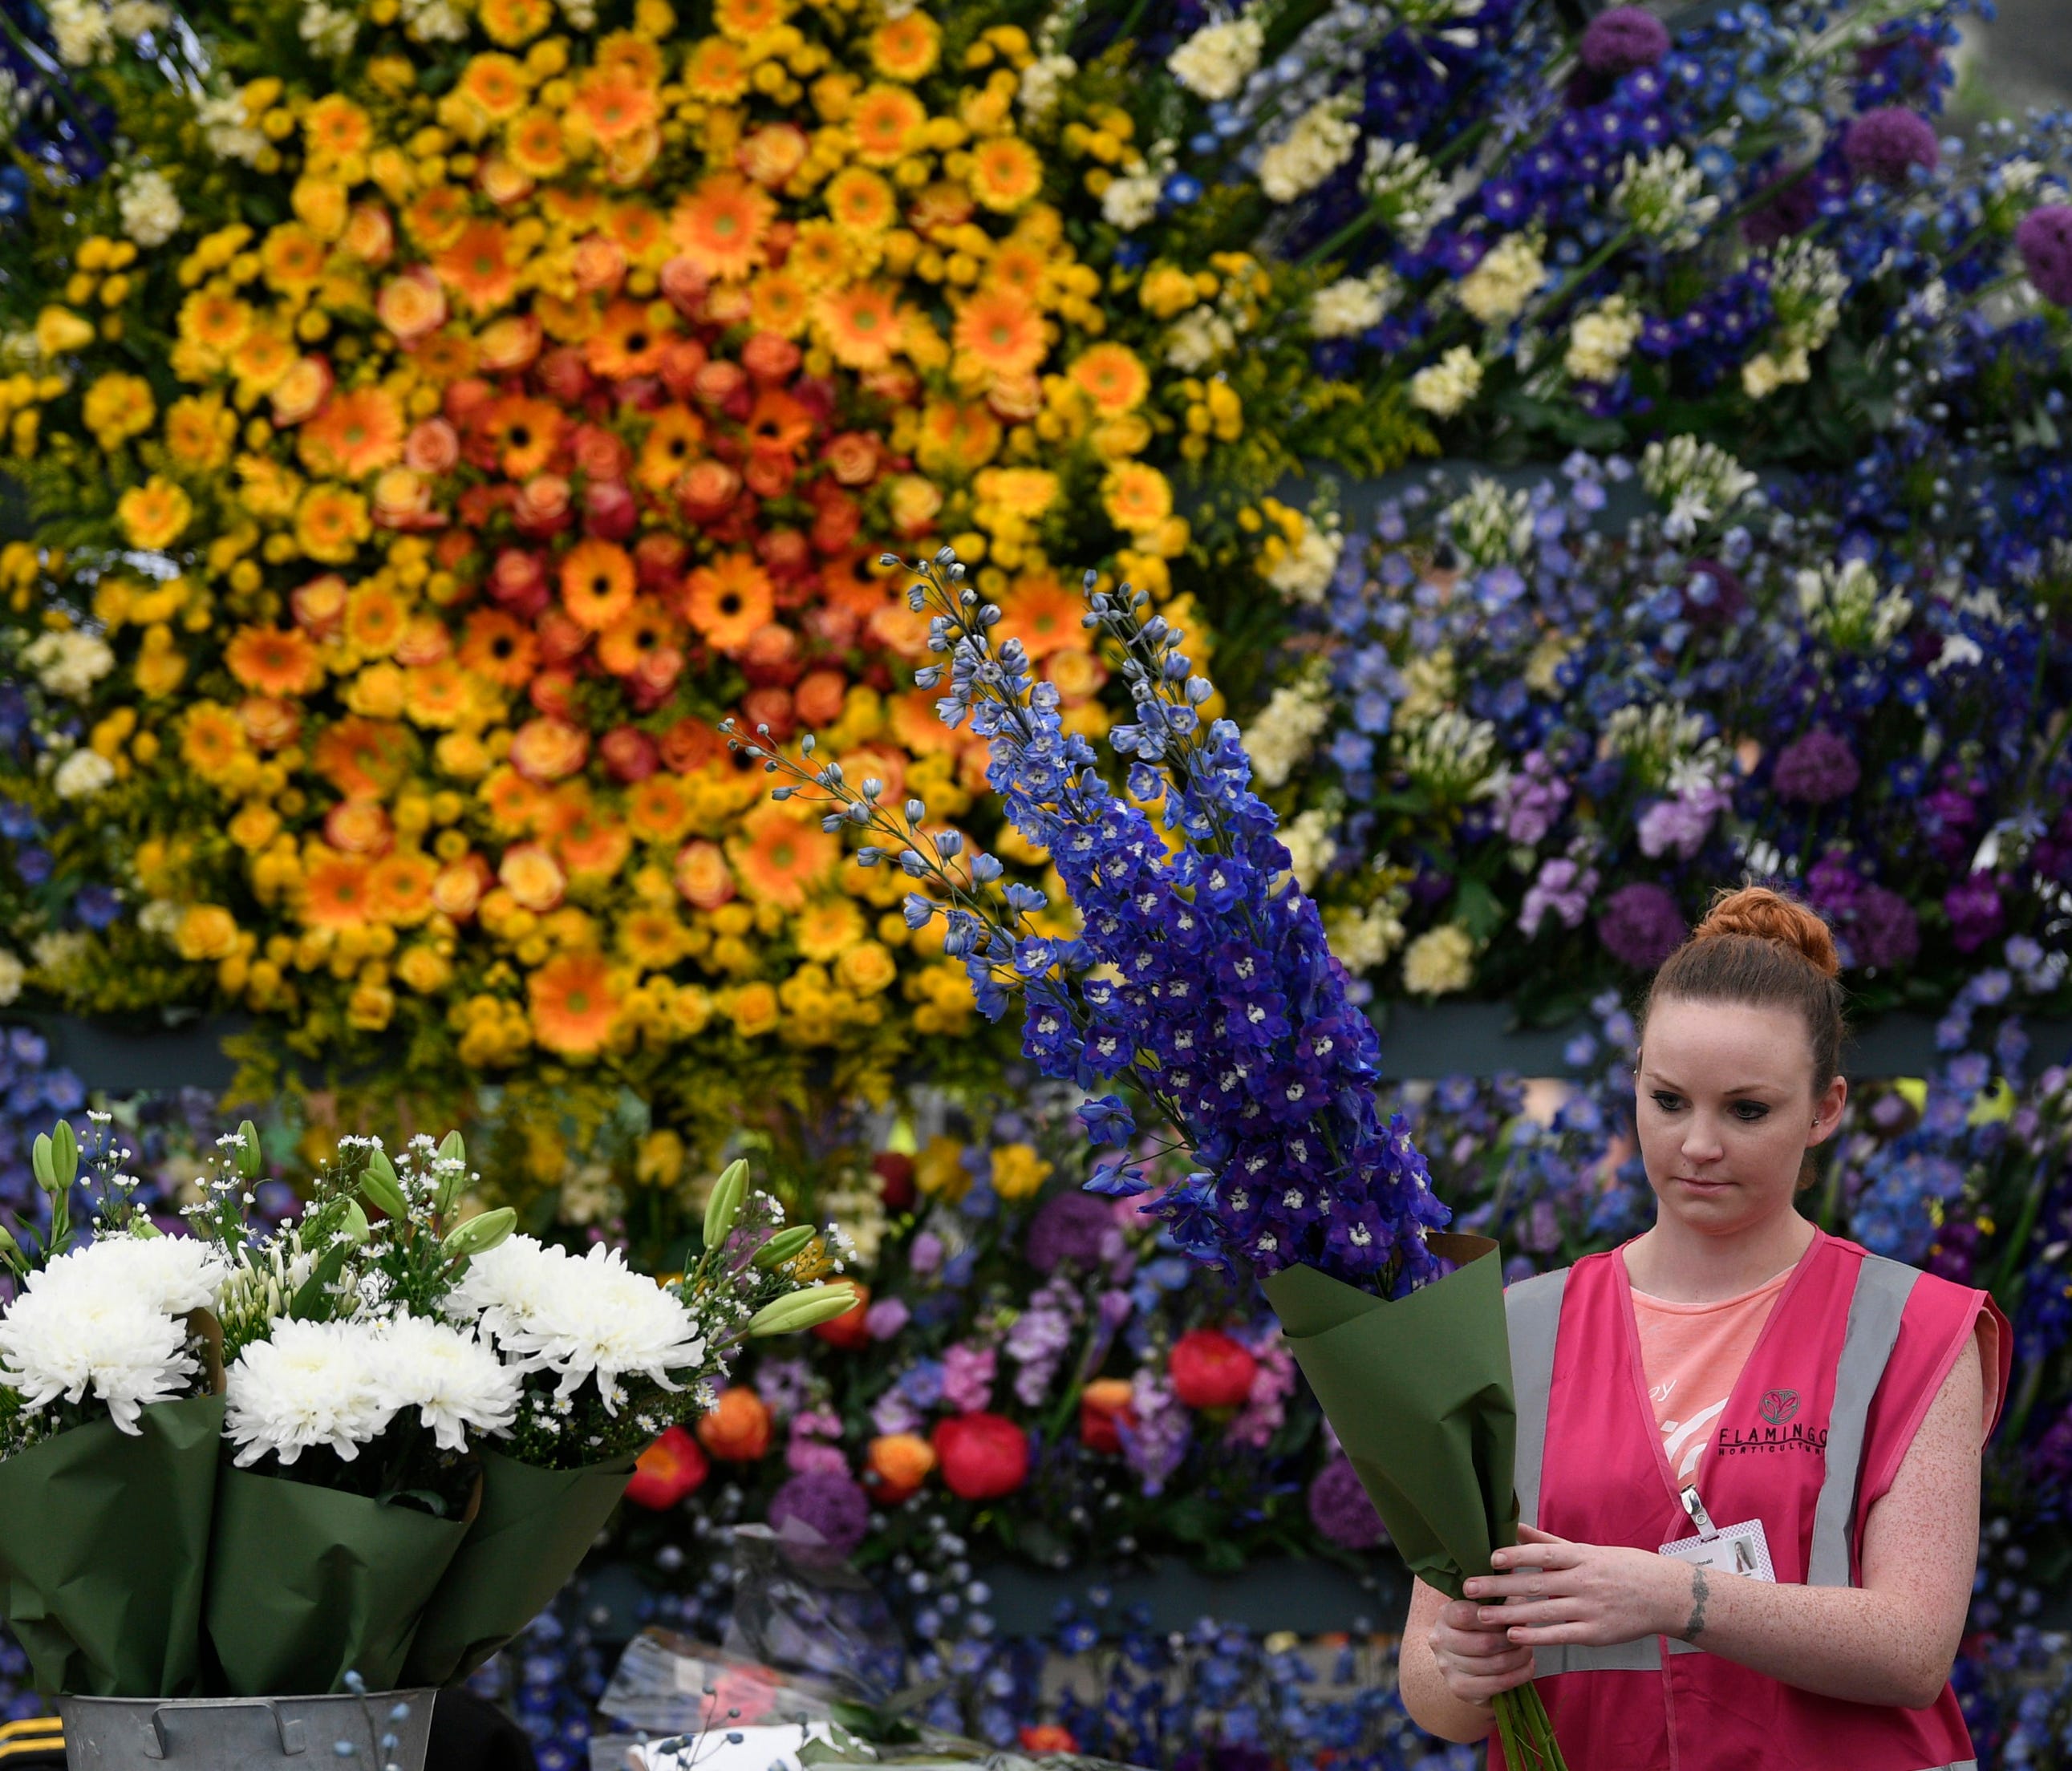 A worker adjusts a display as preparations take place for the RHS Chelsea Flower Show in London on May 20, 2018. The Royal Horticultural Society Chelsea Flower Show in has been been held since 1912 and runs this year from May 22 to May 26.